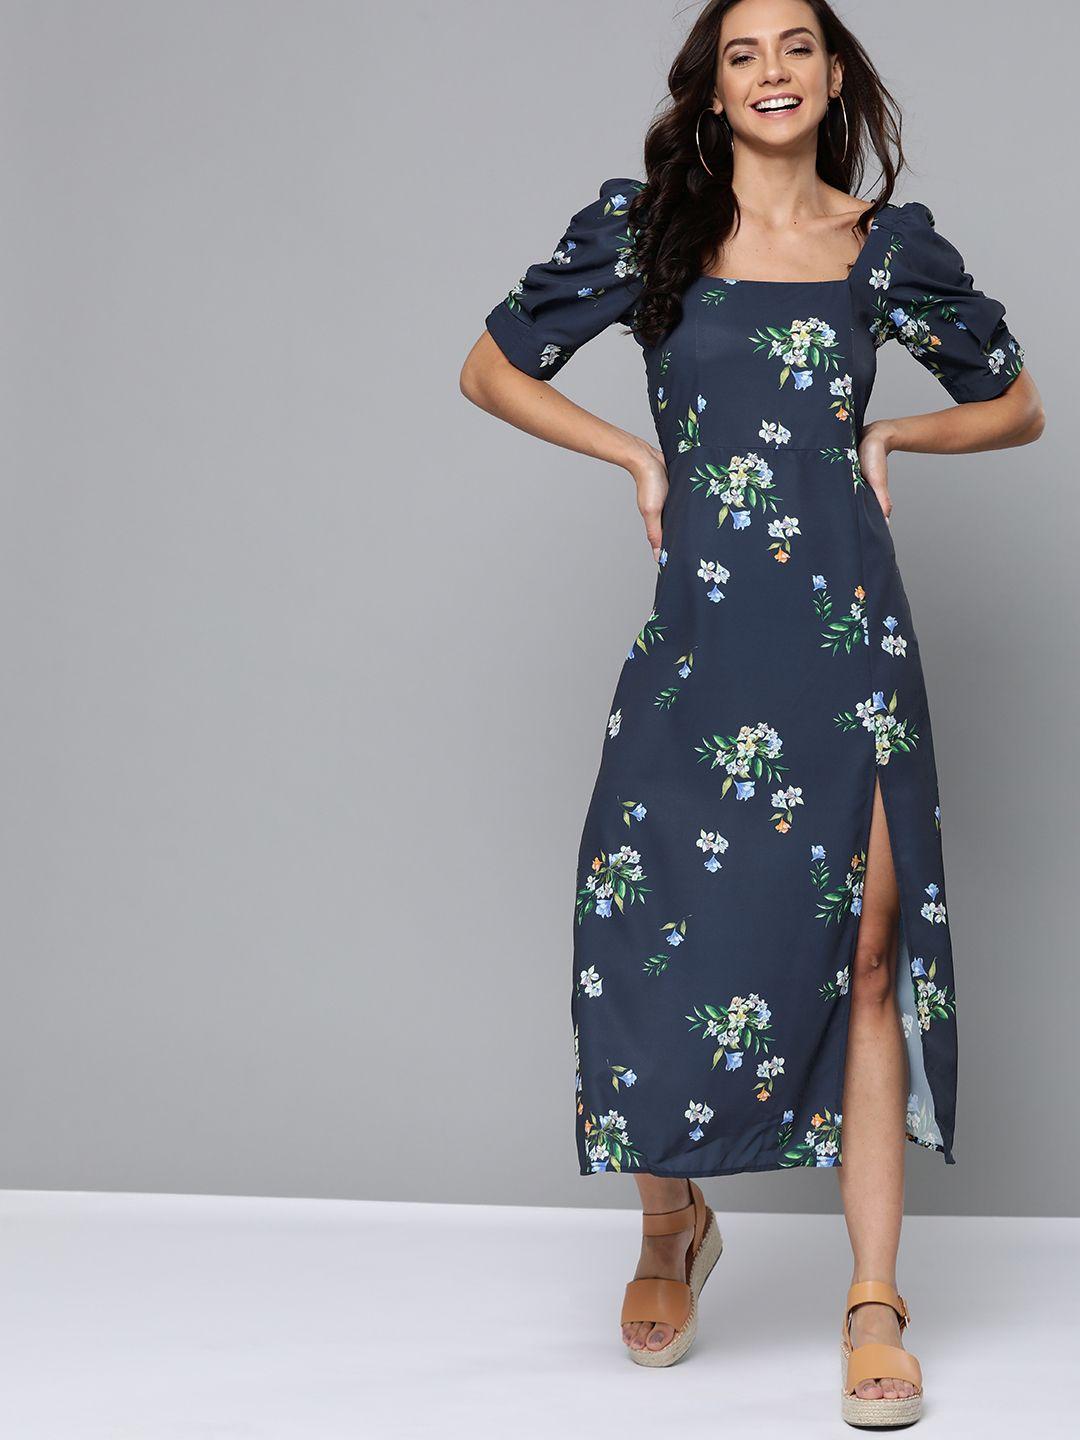 mast & harbour women navy blue & green floral printed a-line dress